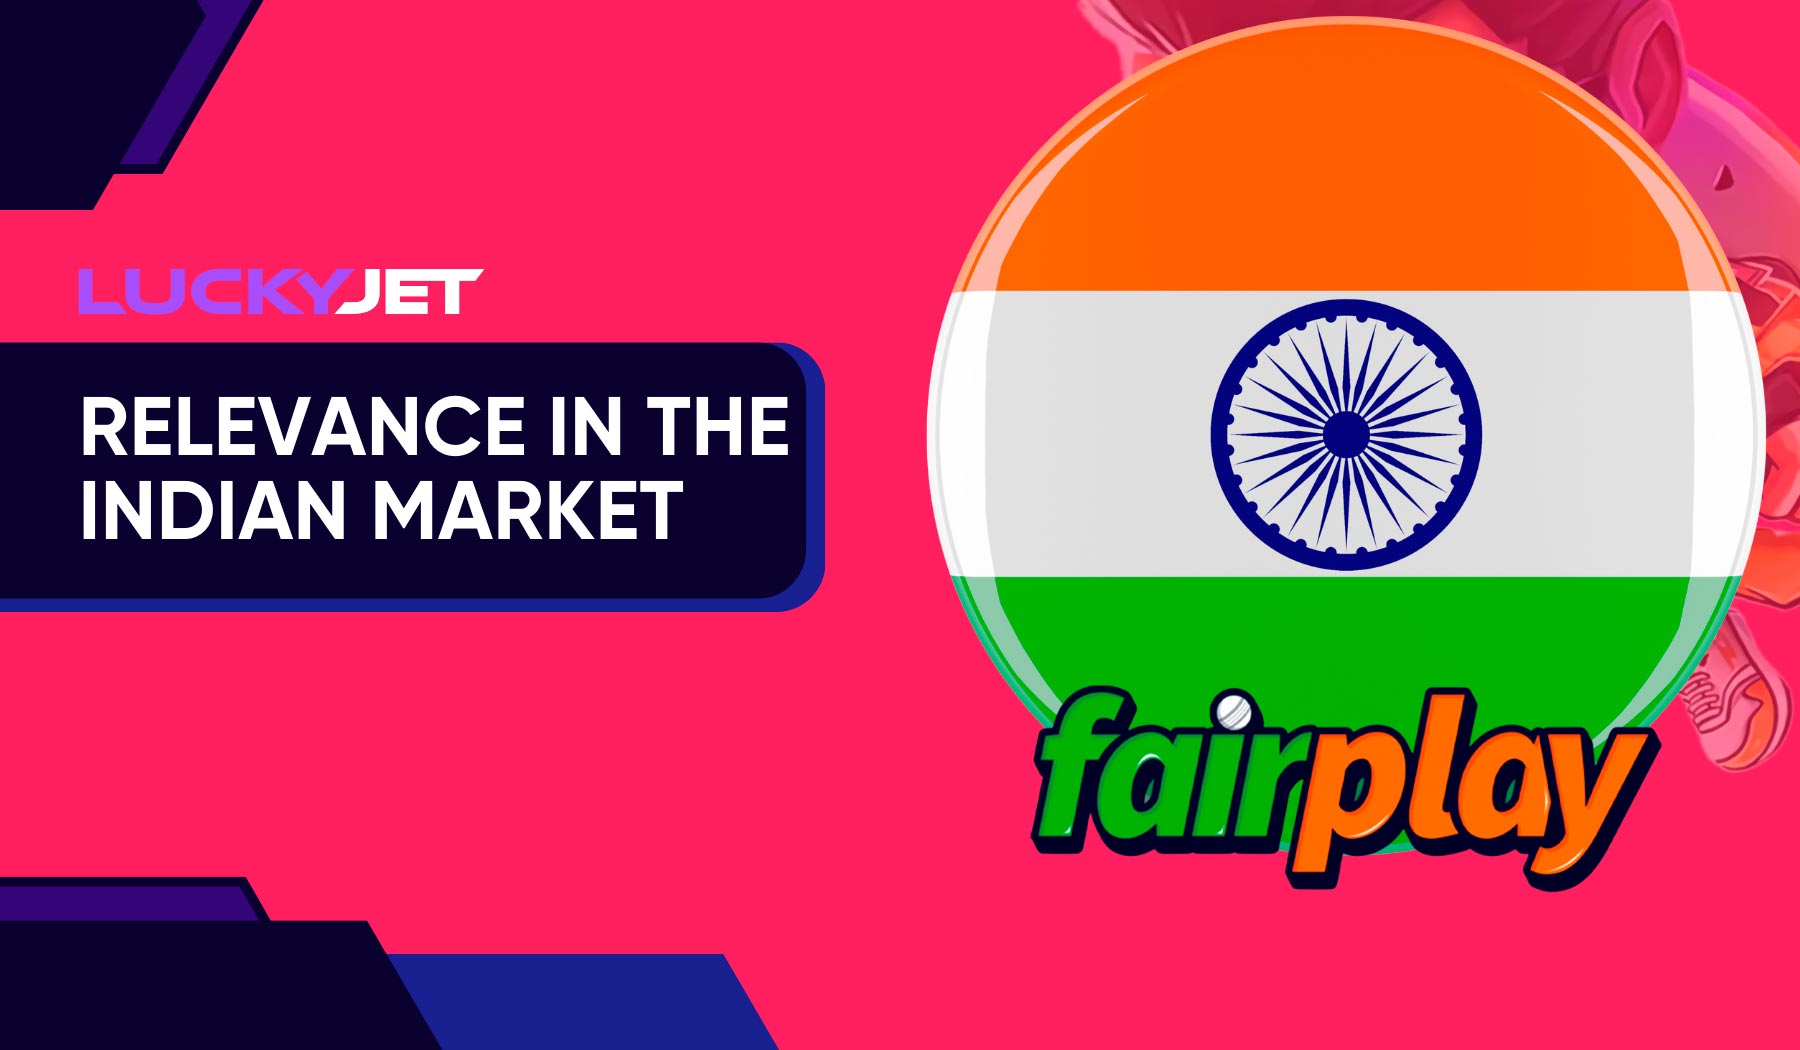 Fairplay Jet Parimatch in the Indian market